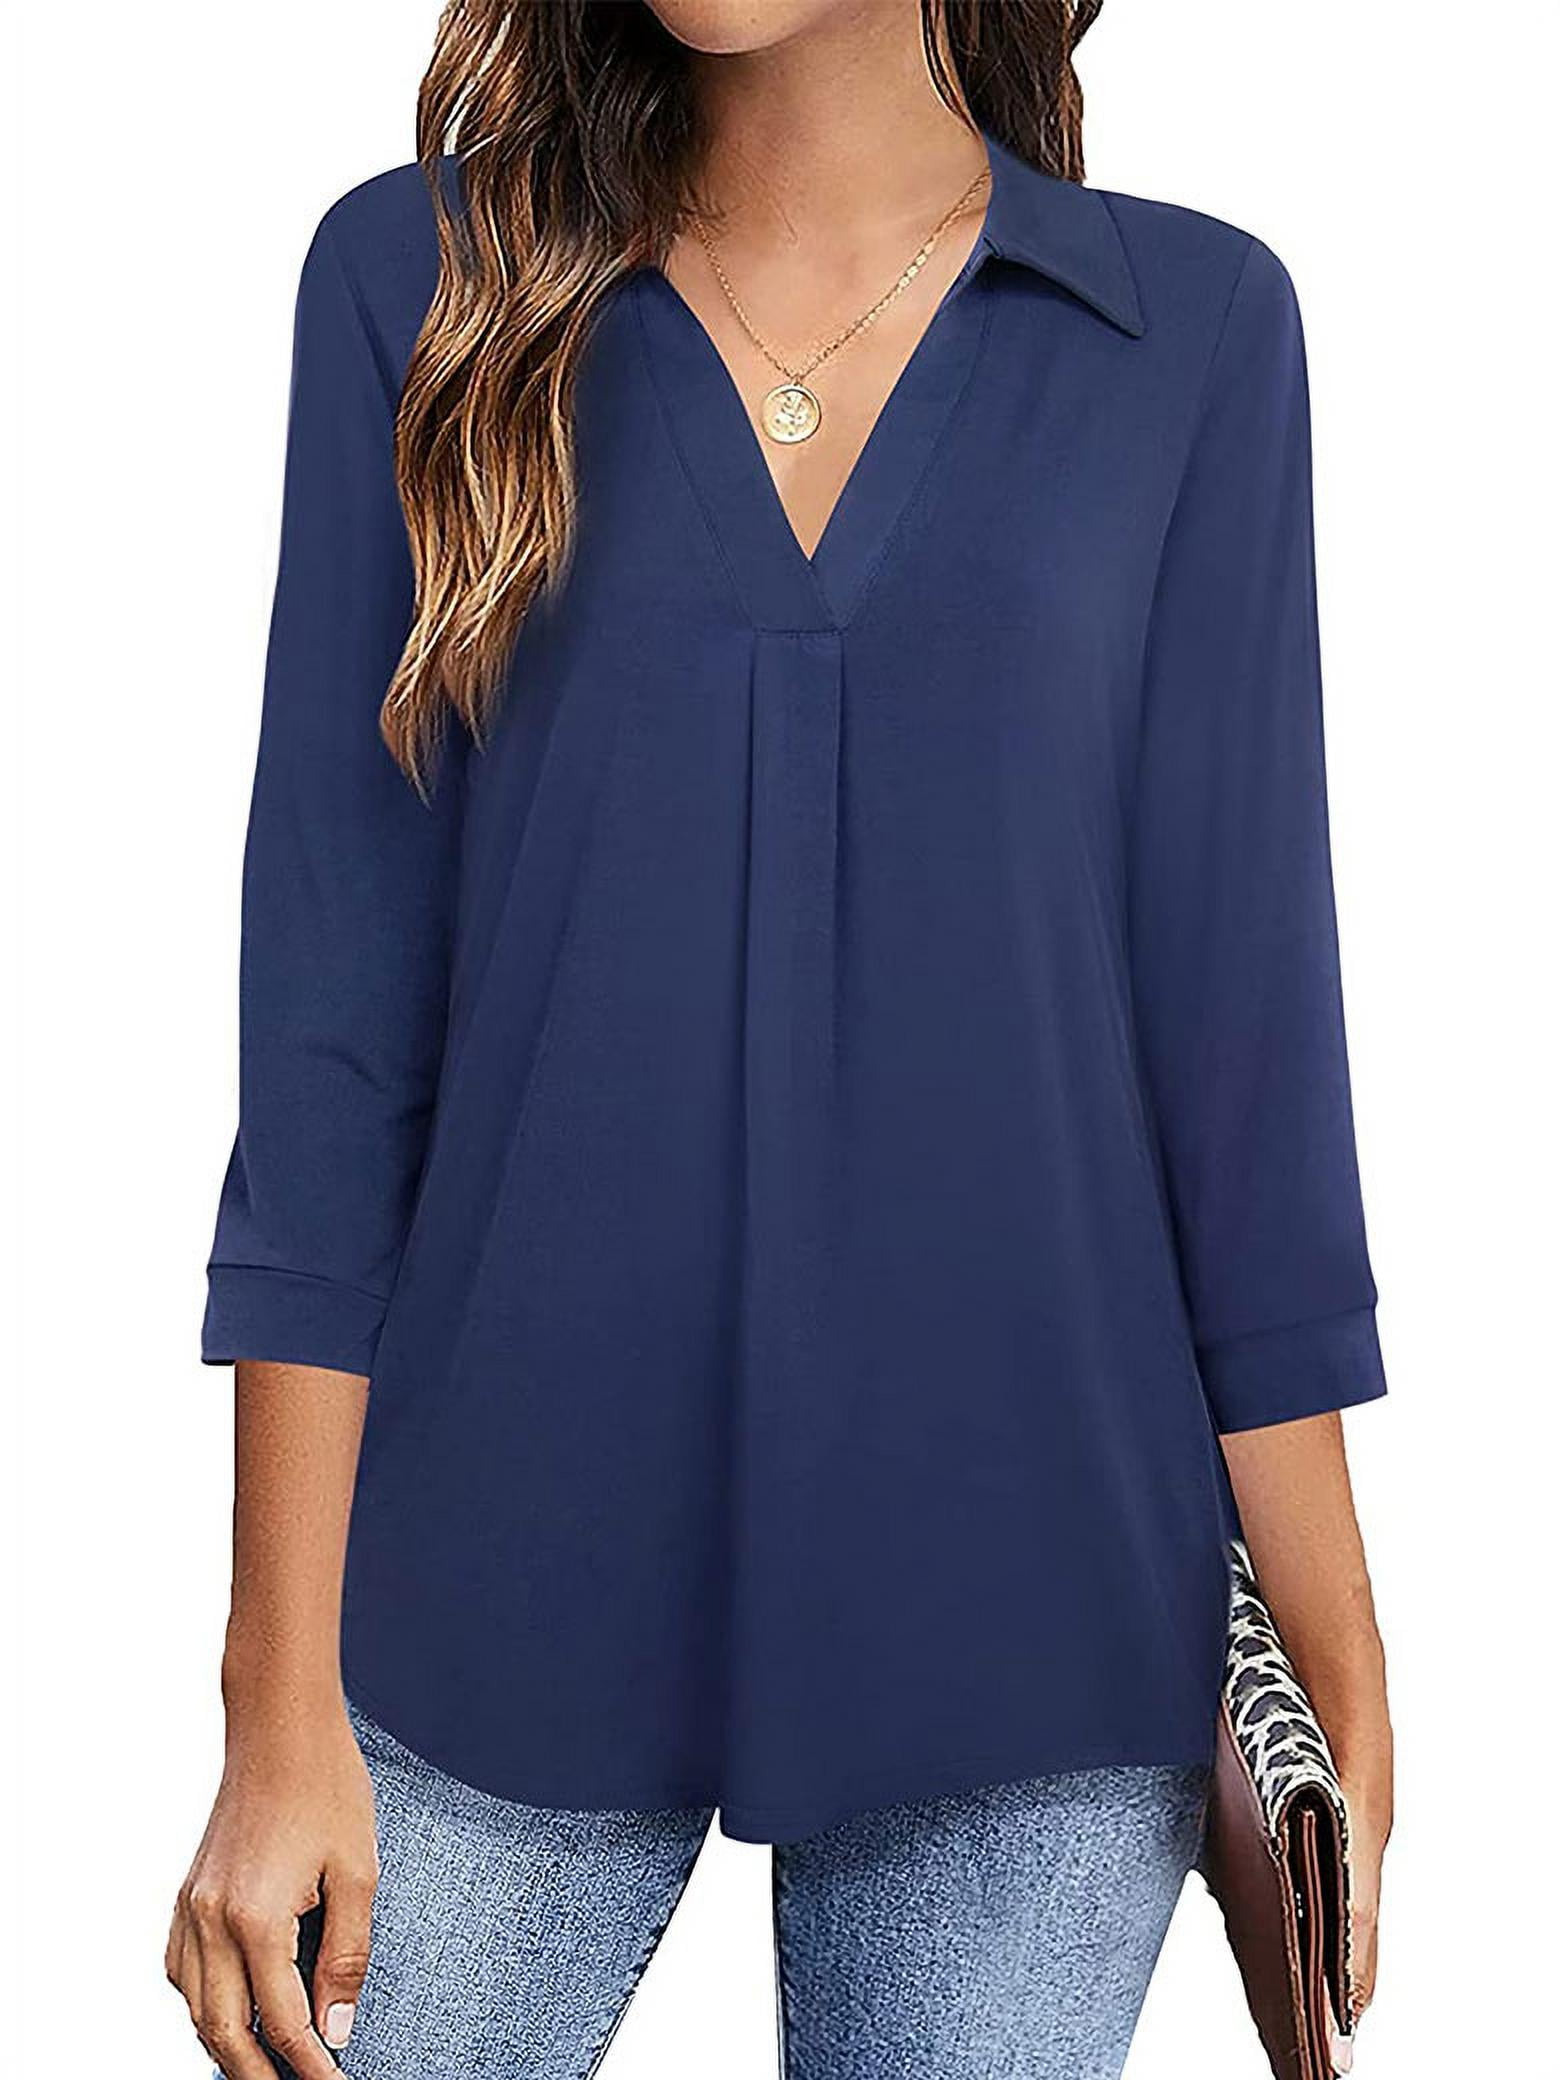 Nlife Women V Neck 3/4 Sleeve Solid Color Pleated Blouse - Walmart.com